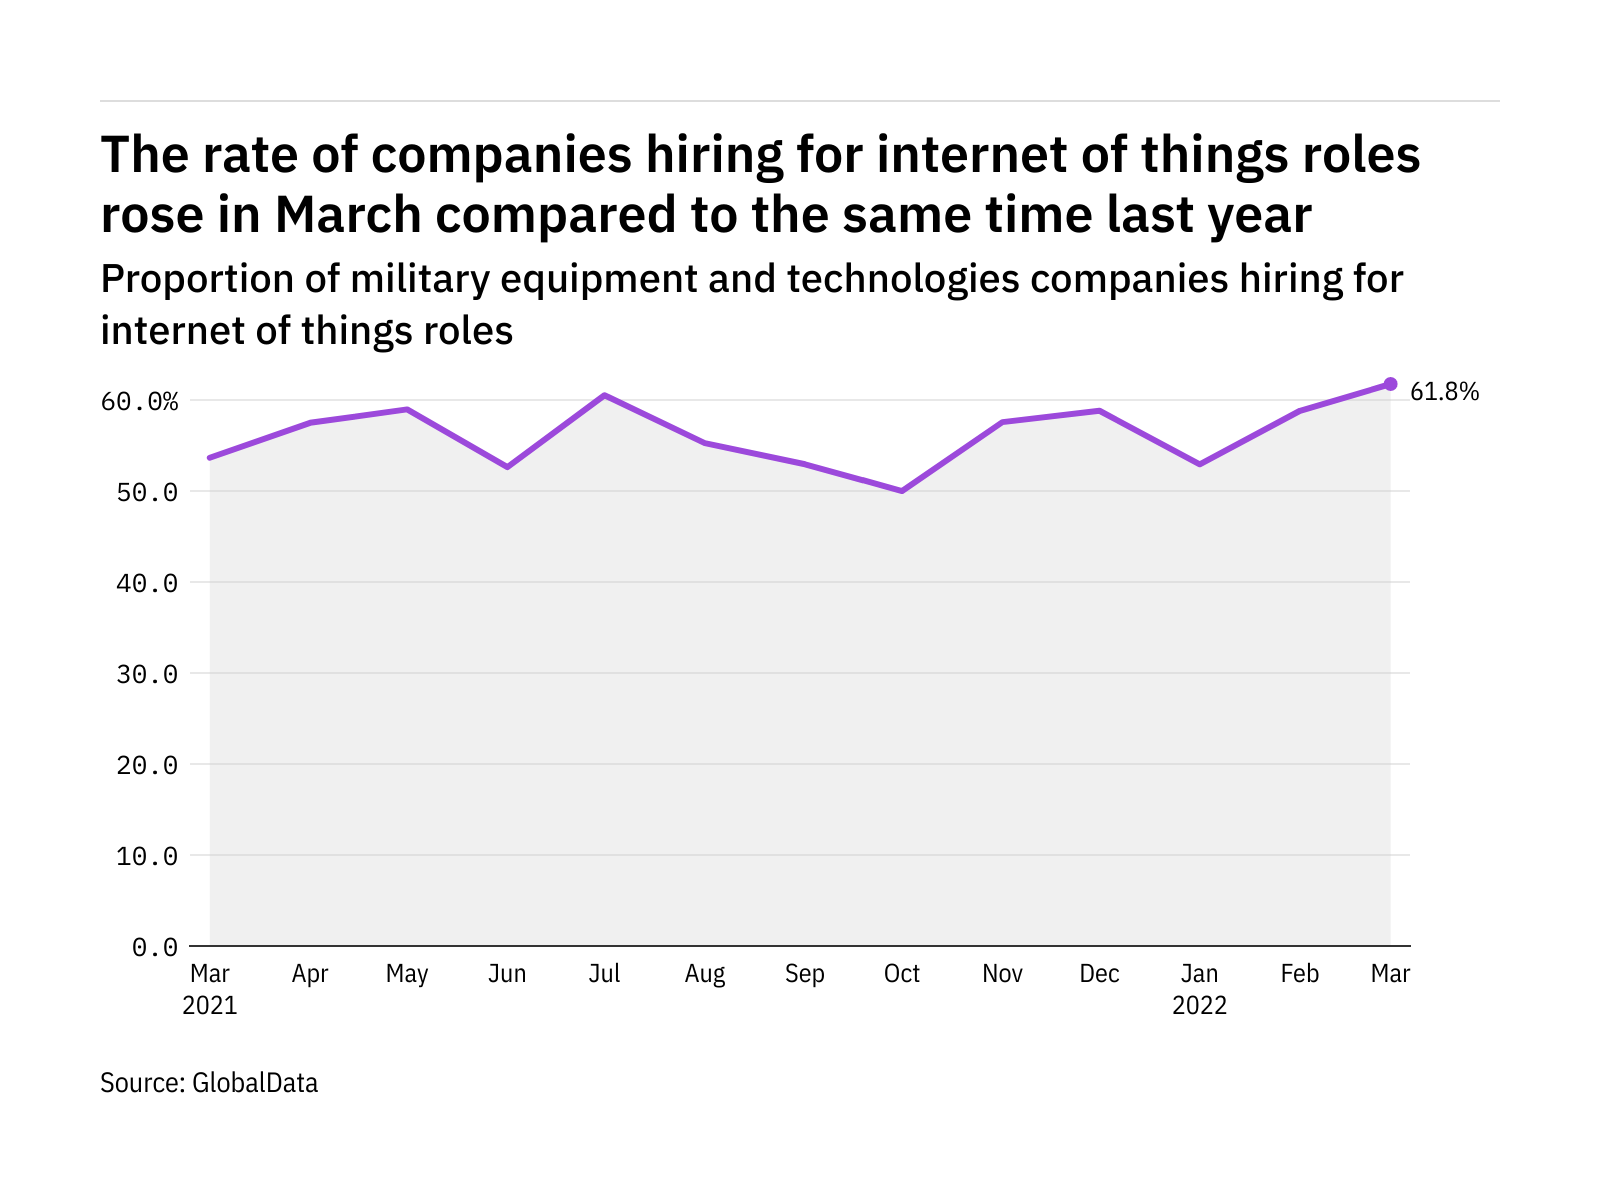 Internet of things hiring levels in the military industry rose to a year-high in March 2022